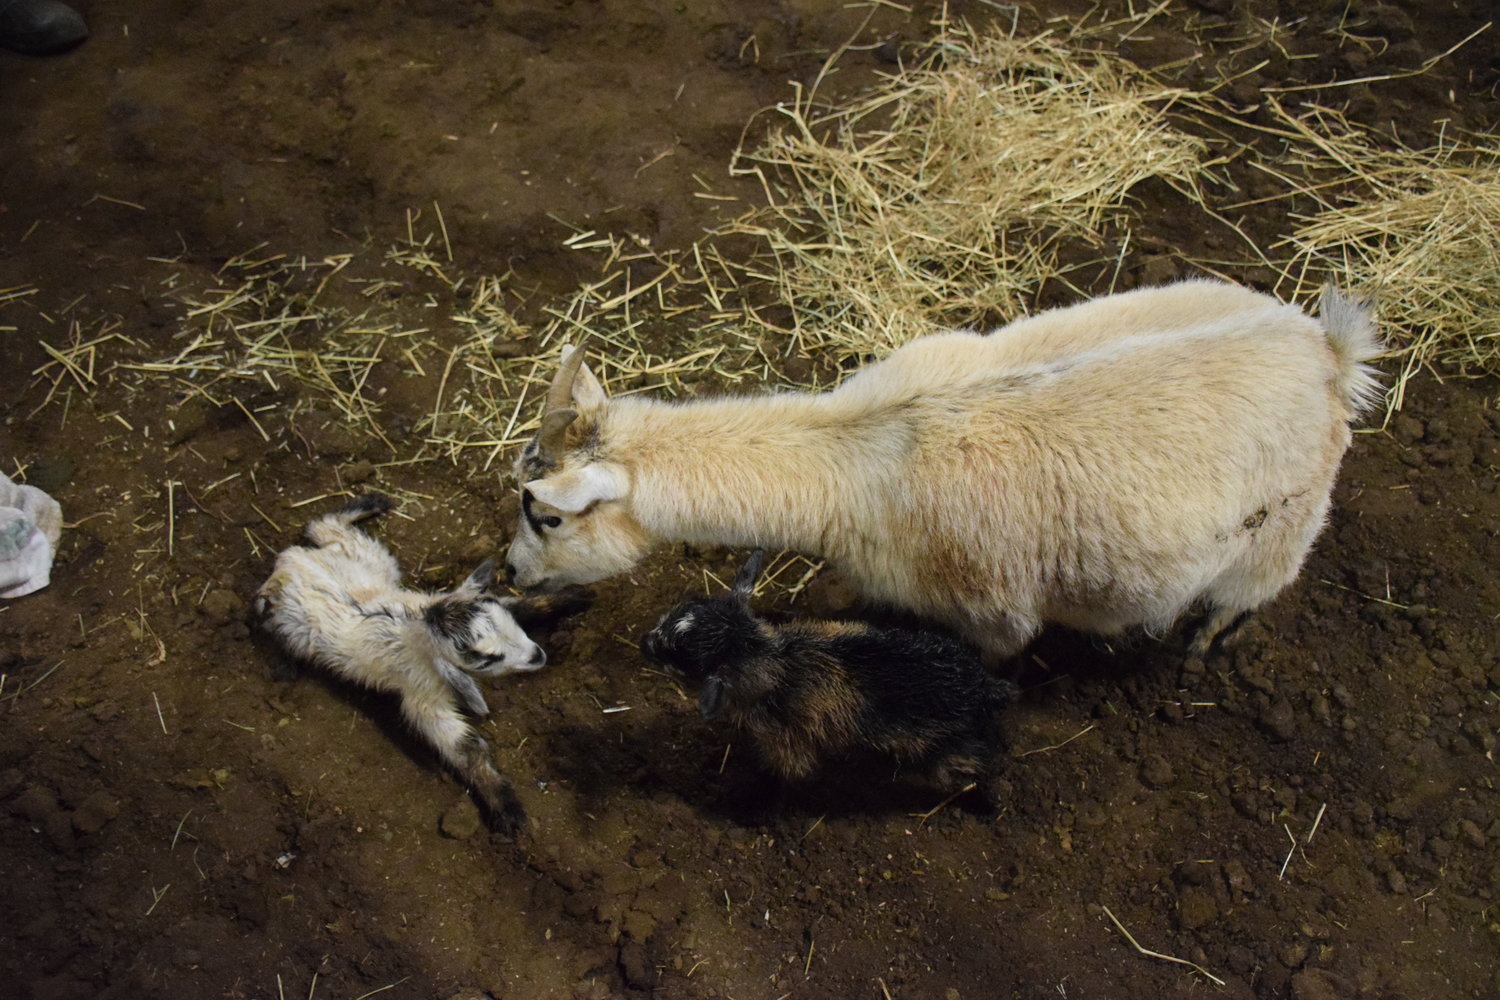 Luna, a pygmy goat owned by Connie Lund, takes care of two newborn boys at the Clark County Saddle Club May 22.